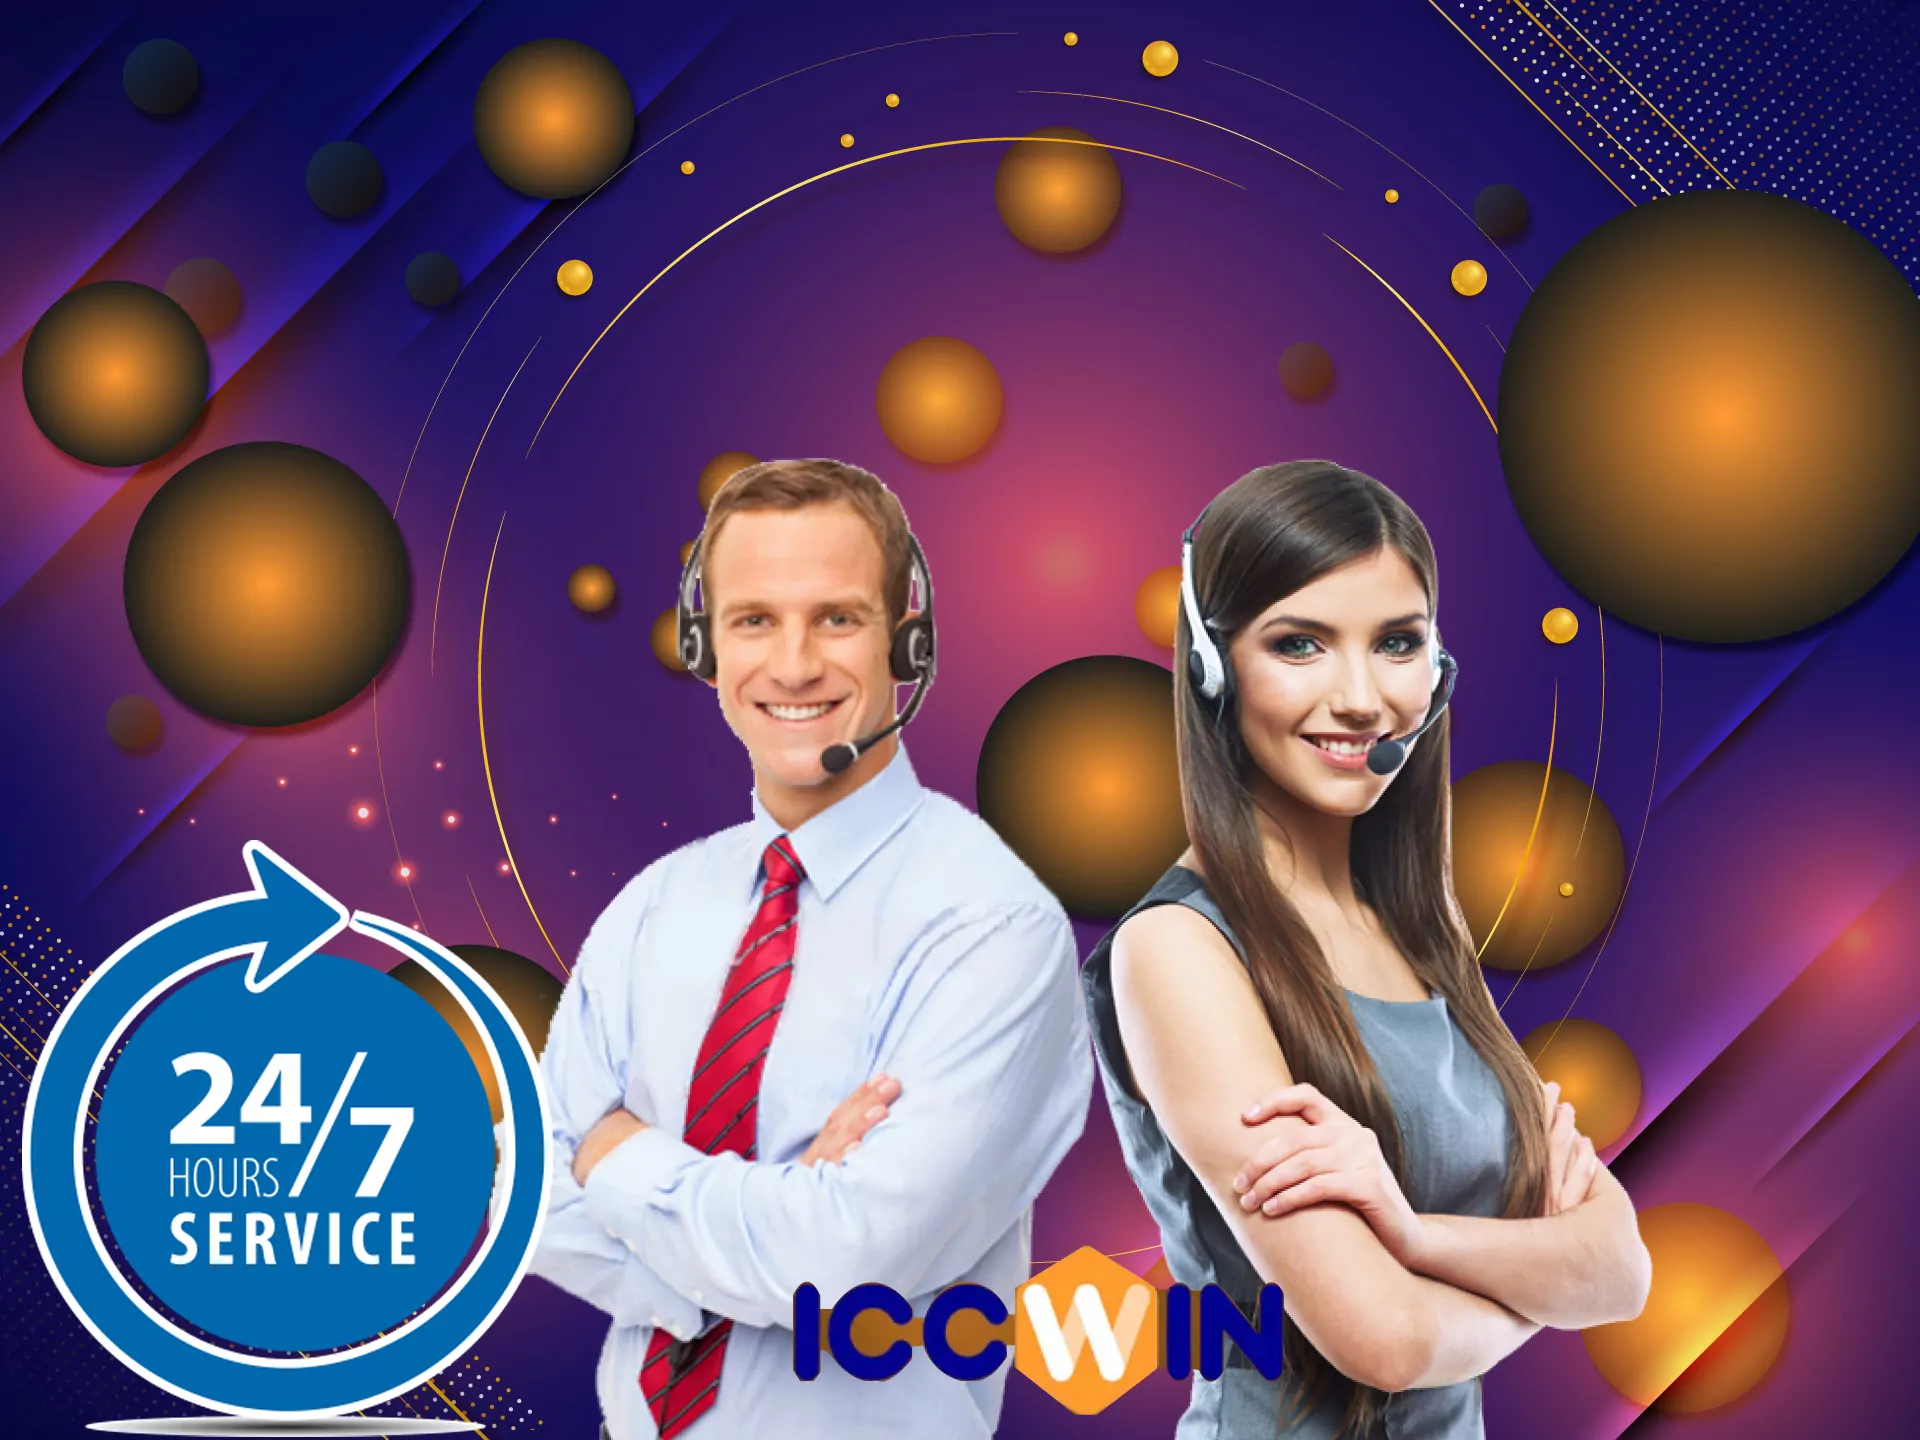 Stay in touch with the ICCWIN support team around the clock.